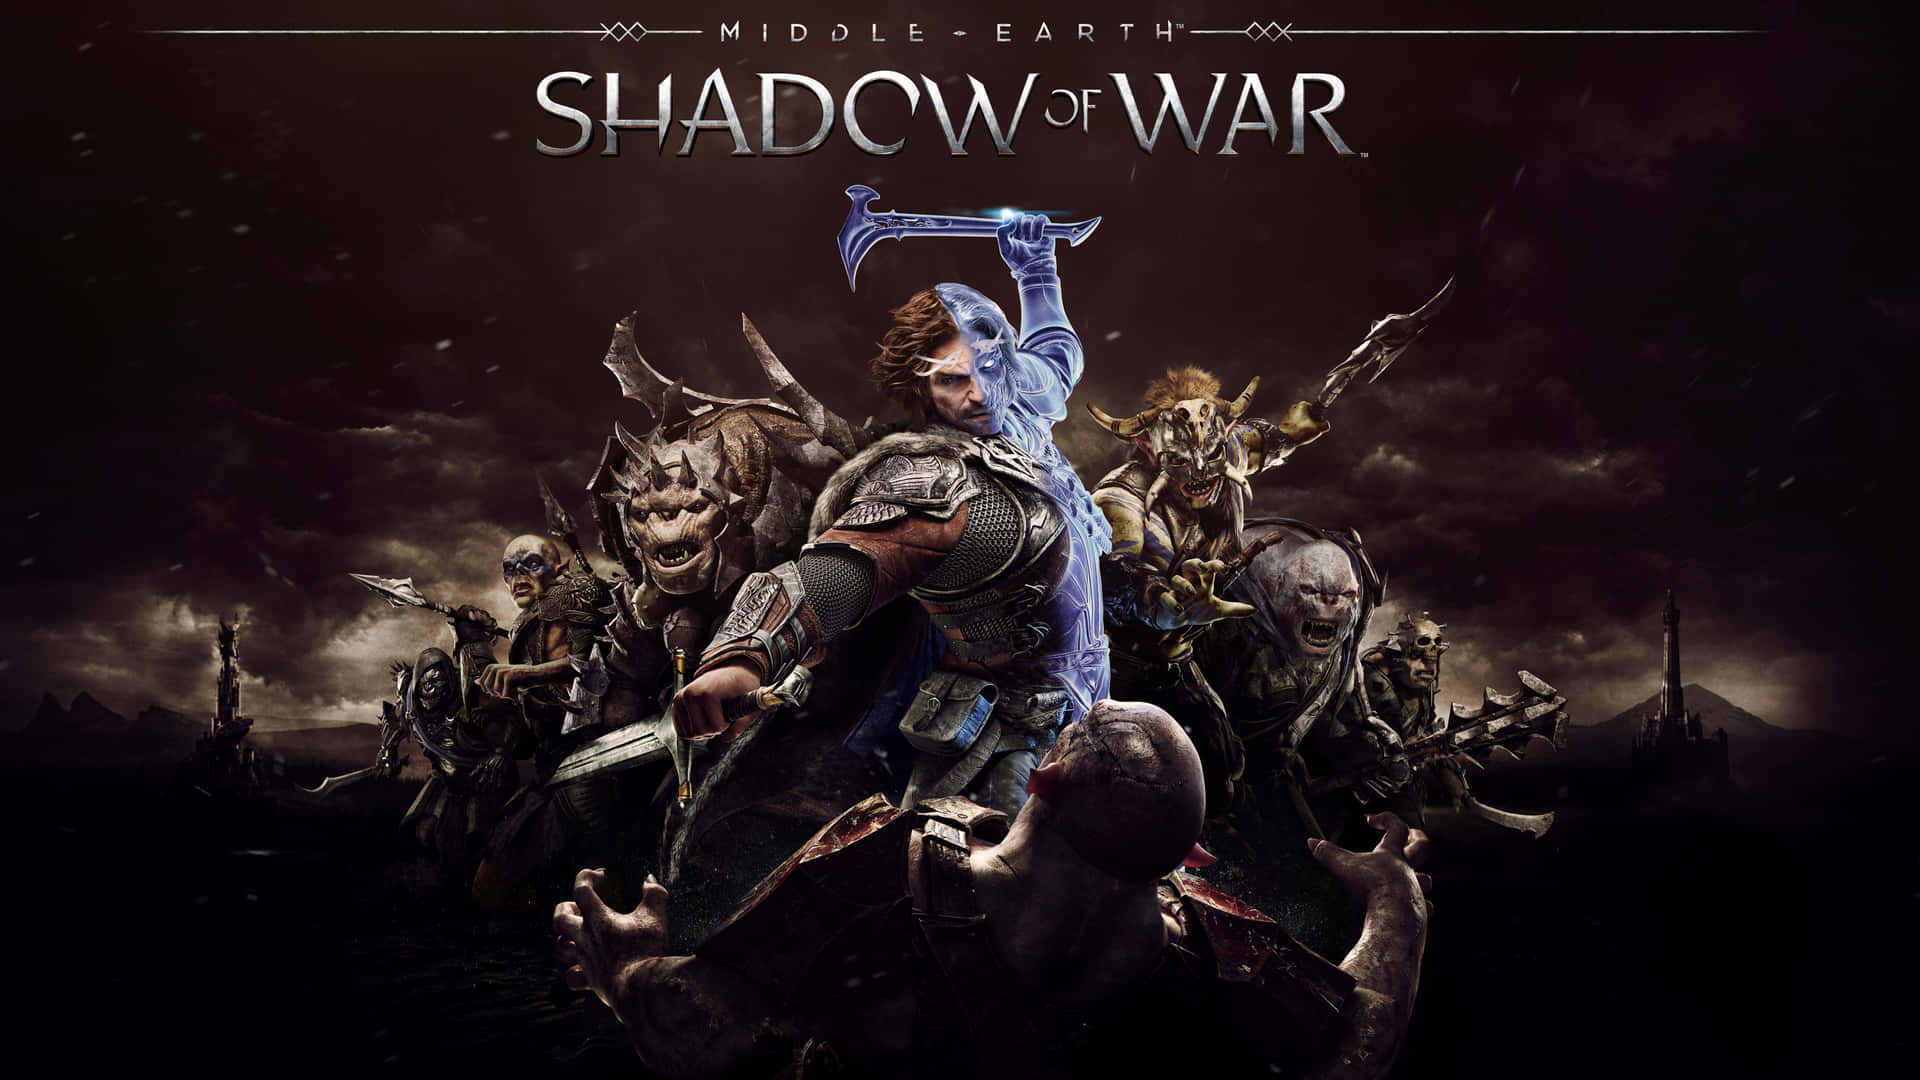 The Cover Of The Game Shadow Of War